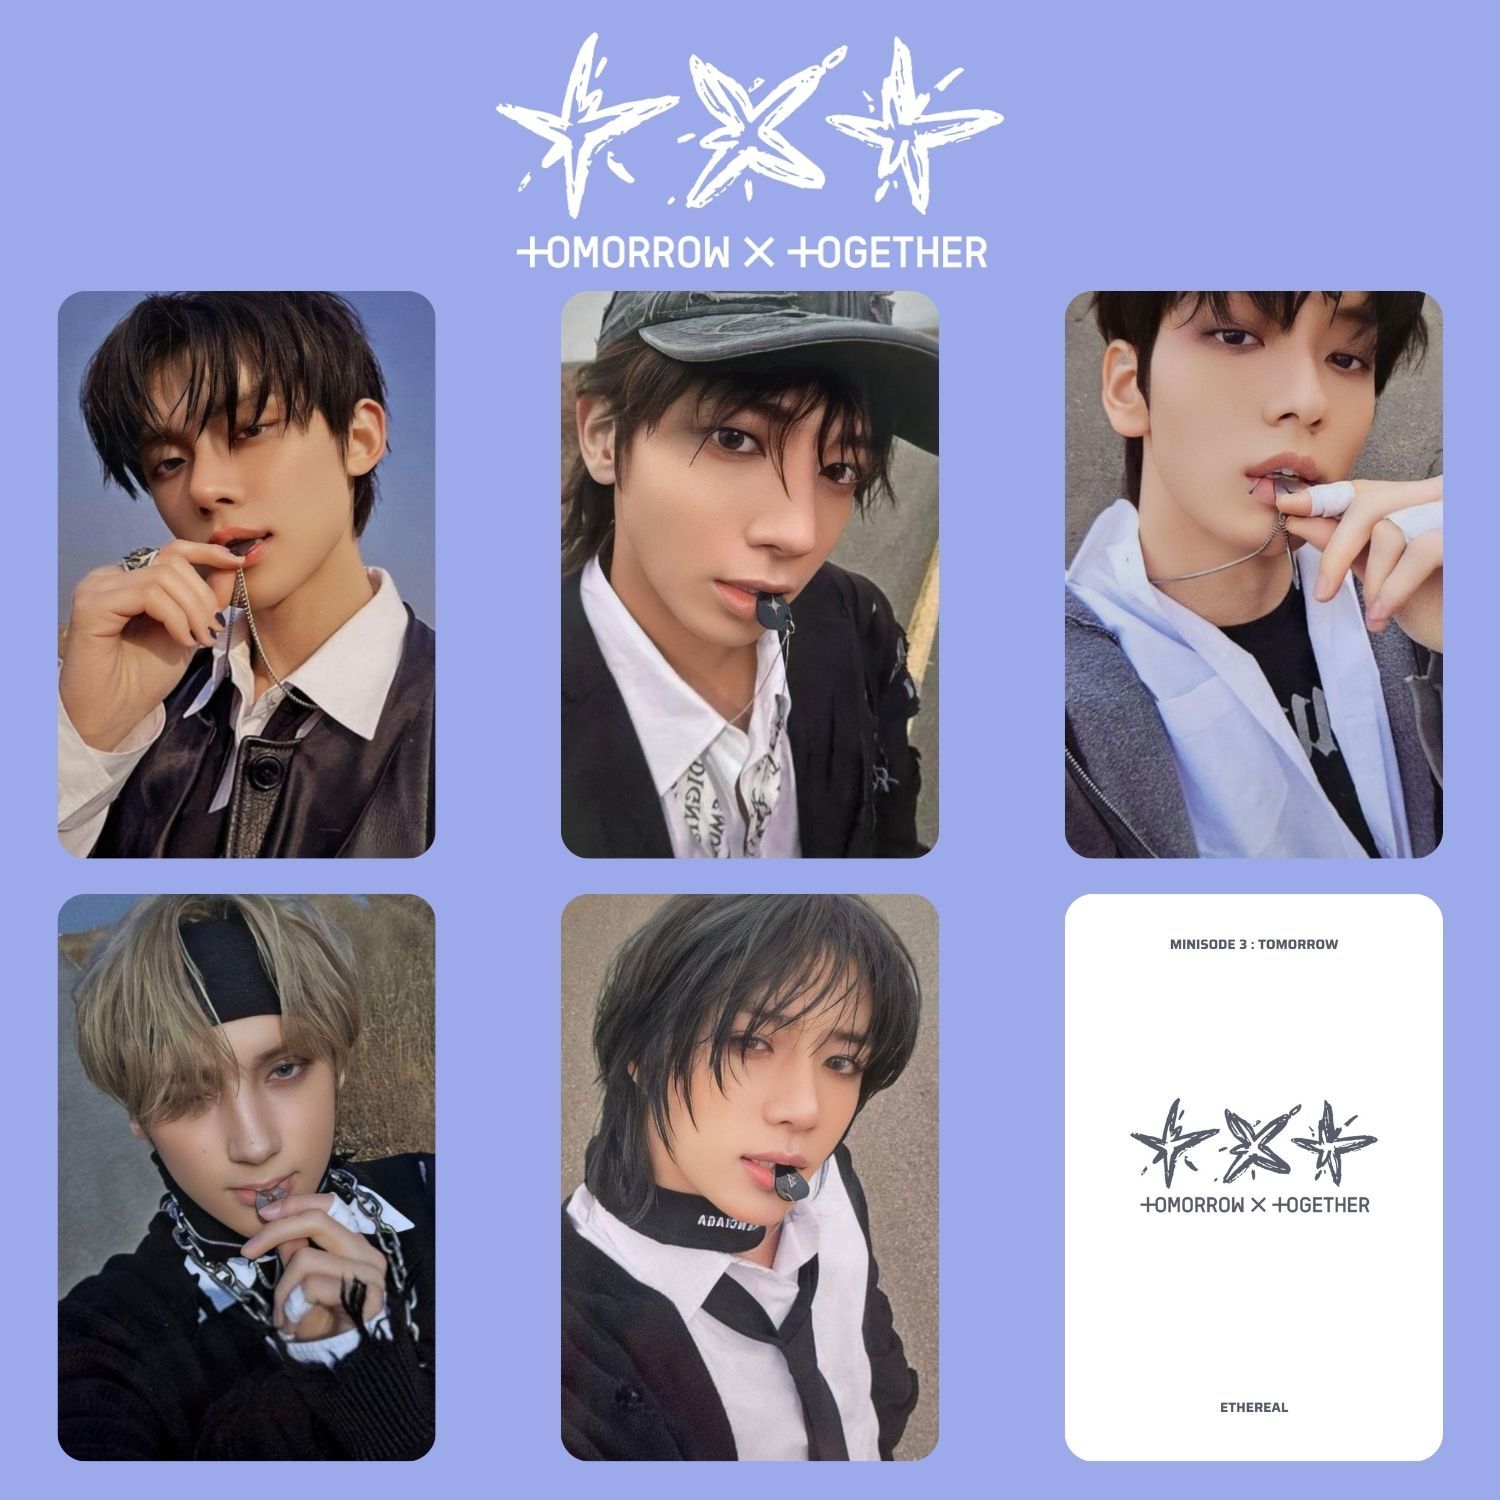 TXT '' Minisode 3 : Tomorrow '' Ethereal Ver. Photocards Set